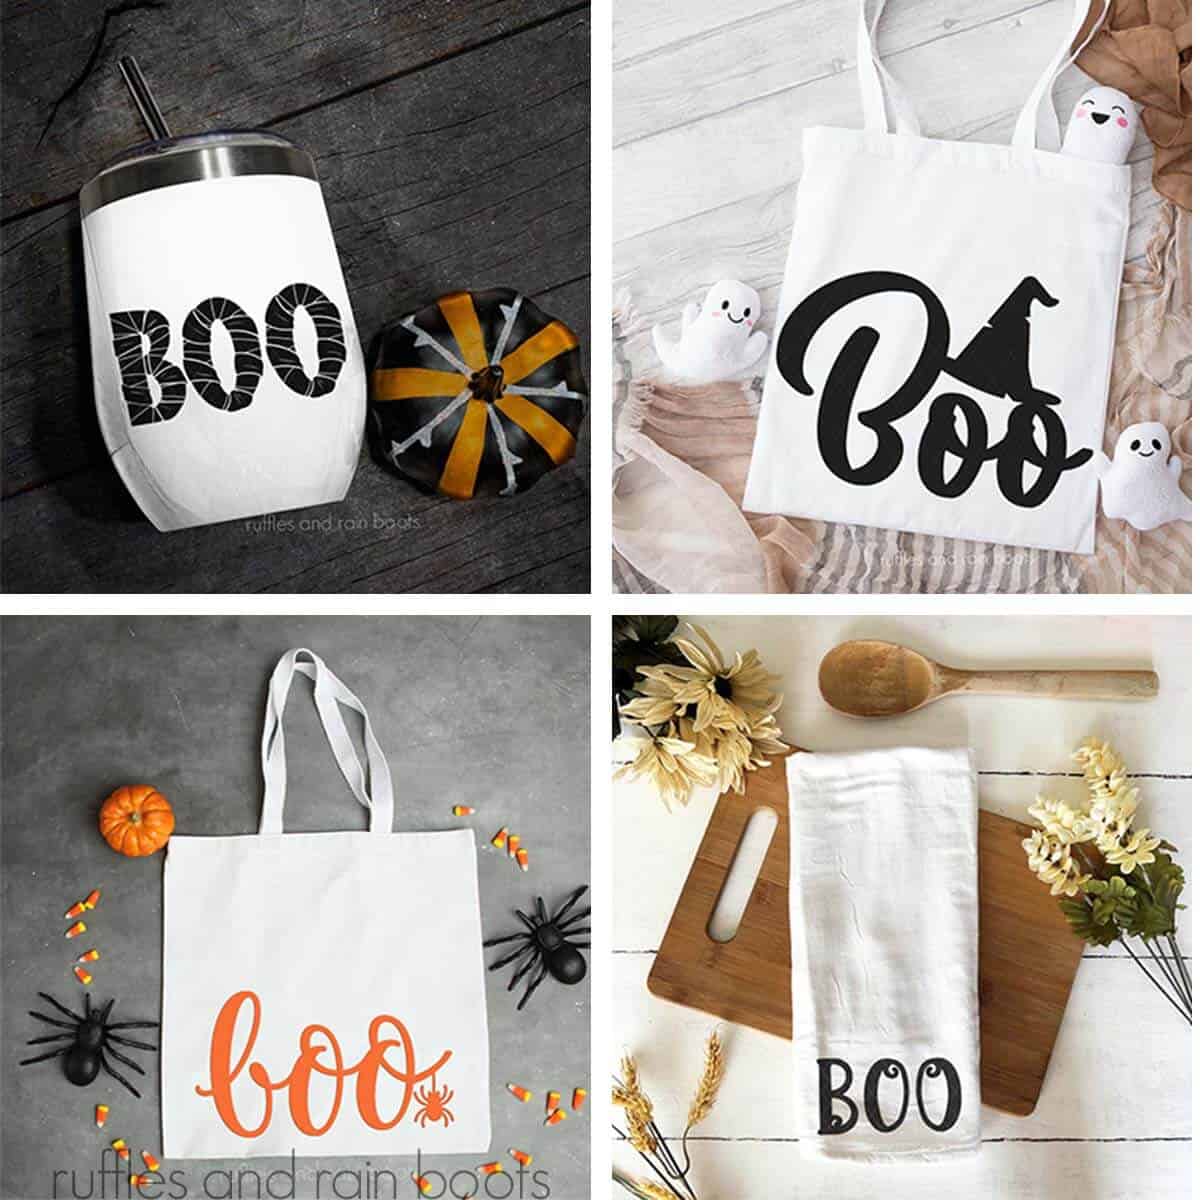 Four image square collage of free SVG boo files used on totes, towels, and a tumbler.